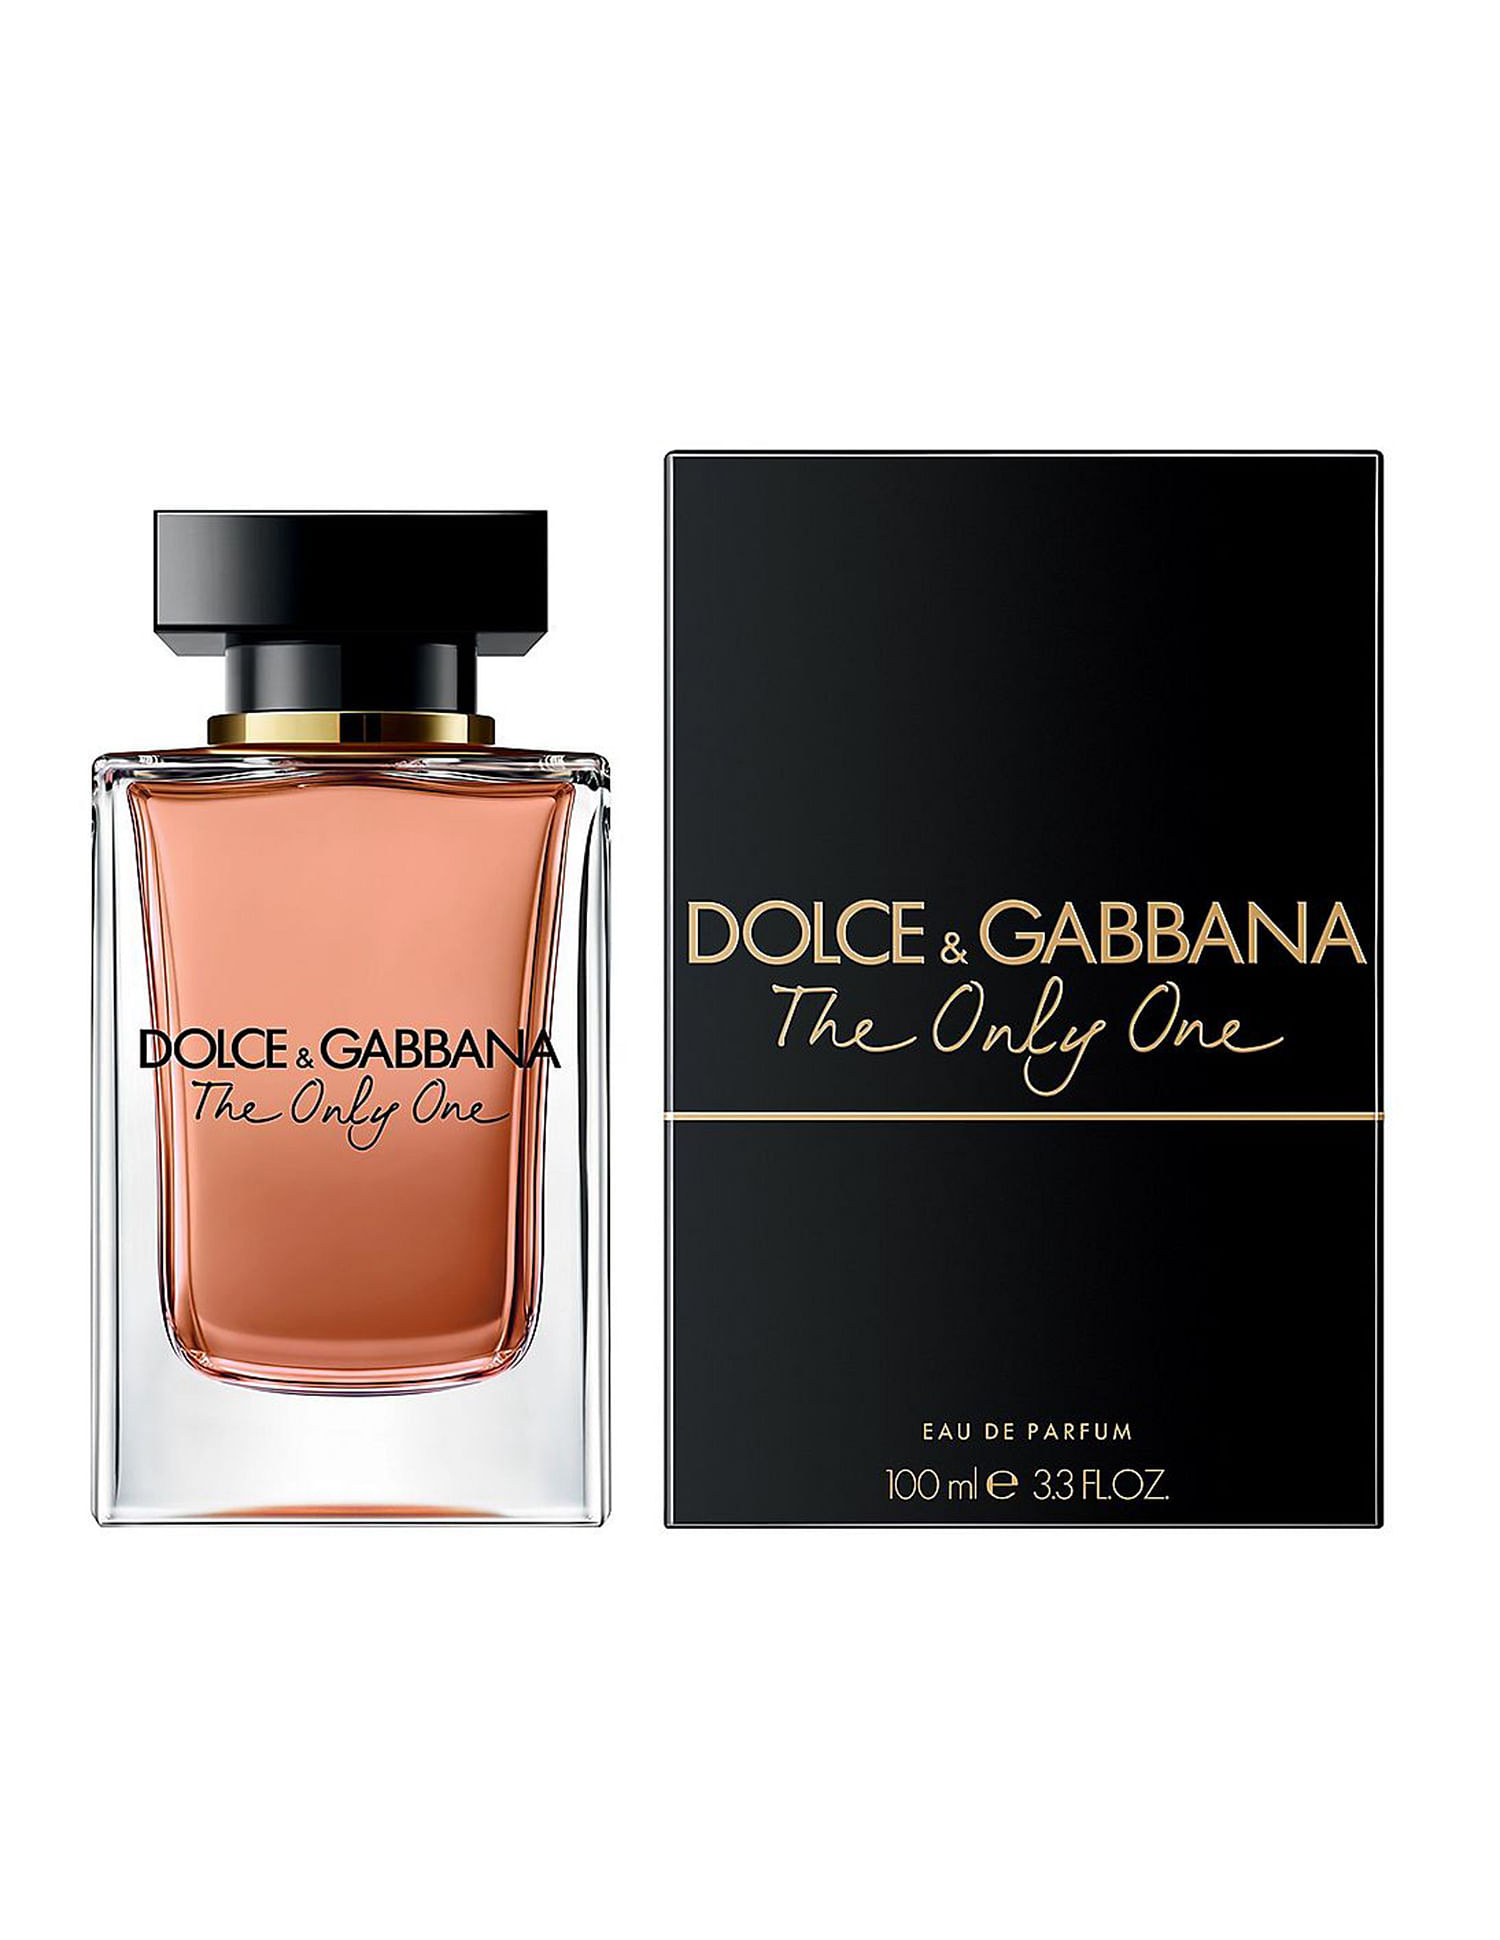 The One by Dolce & Gabbana | Eau de Parfum Natural Spray | Fragrance for  Men | Elegant and Sensual Scents of Amber and Tobacco | 100 mL / 3.3 oz